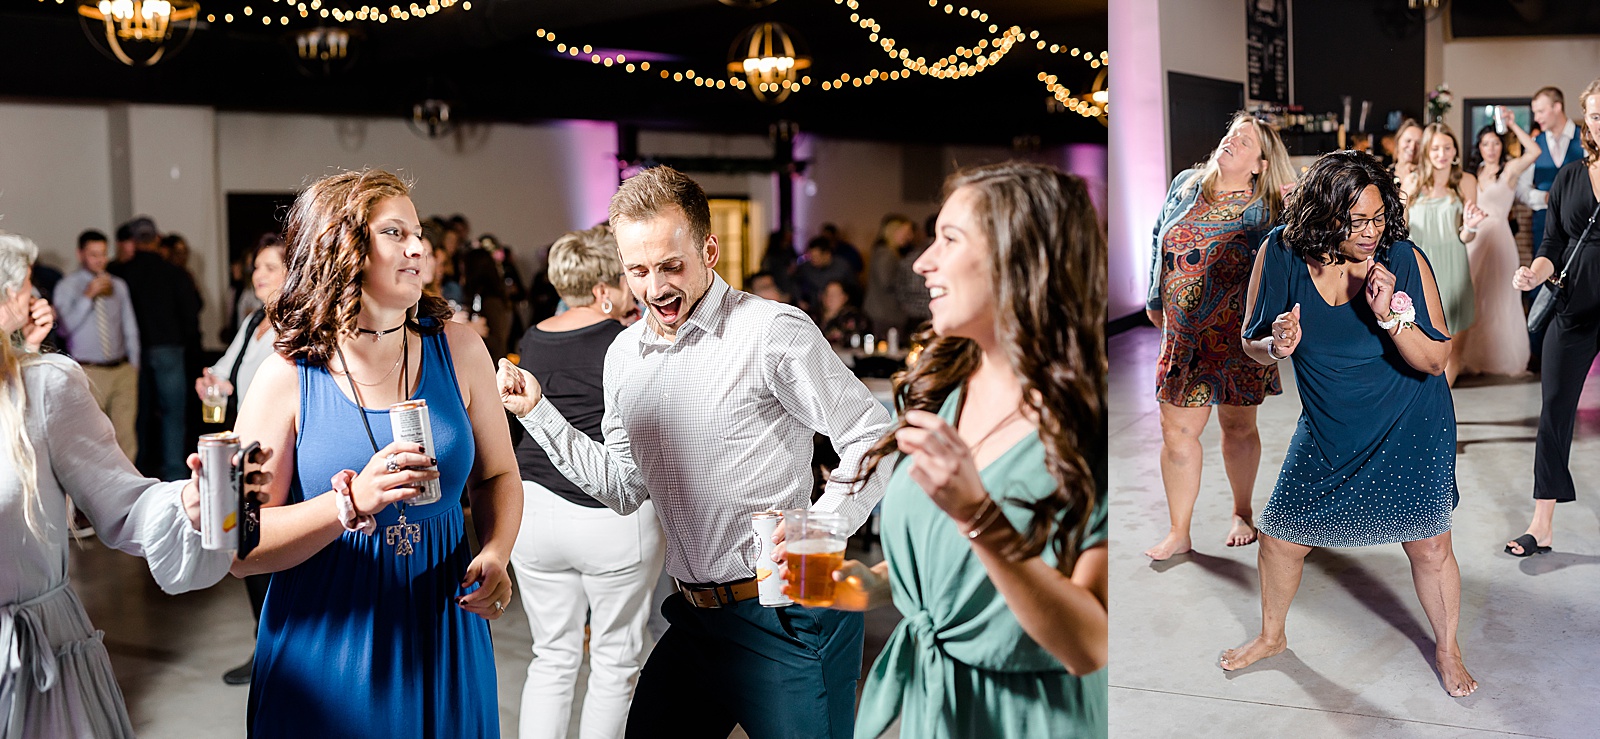 Guests dancing at wedding reception for rustic wedding